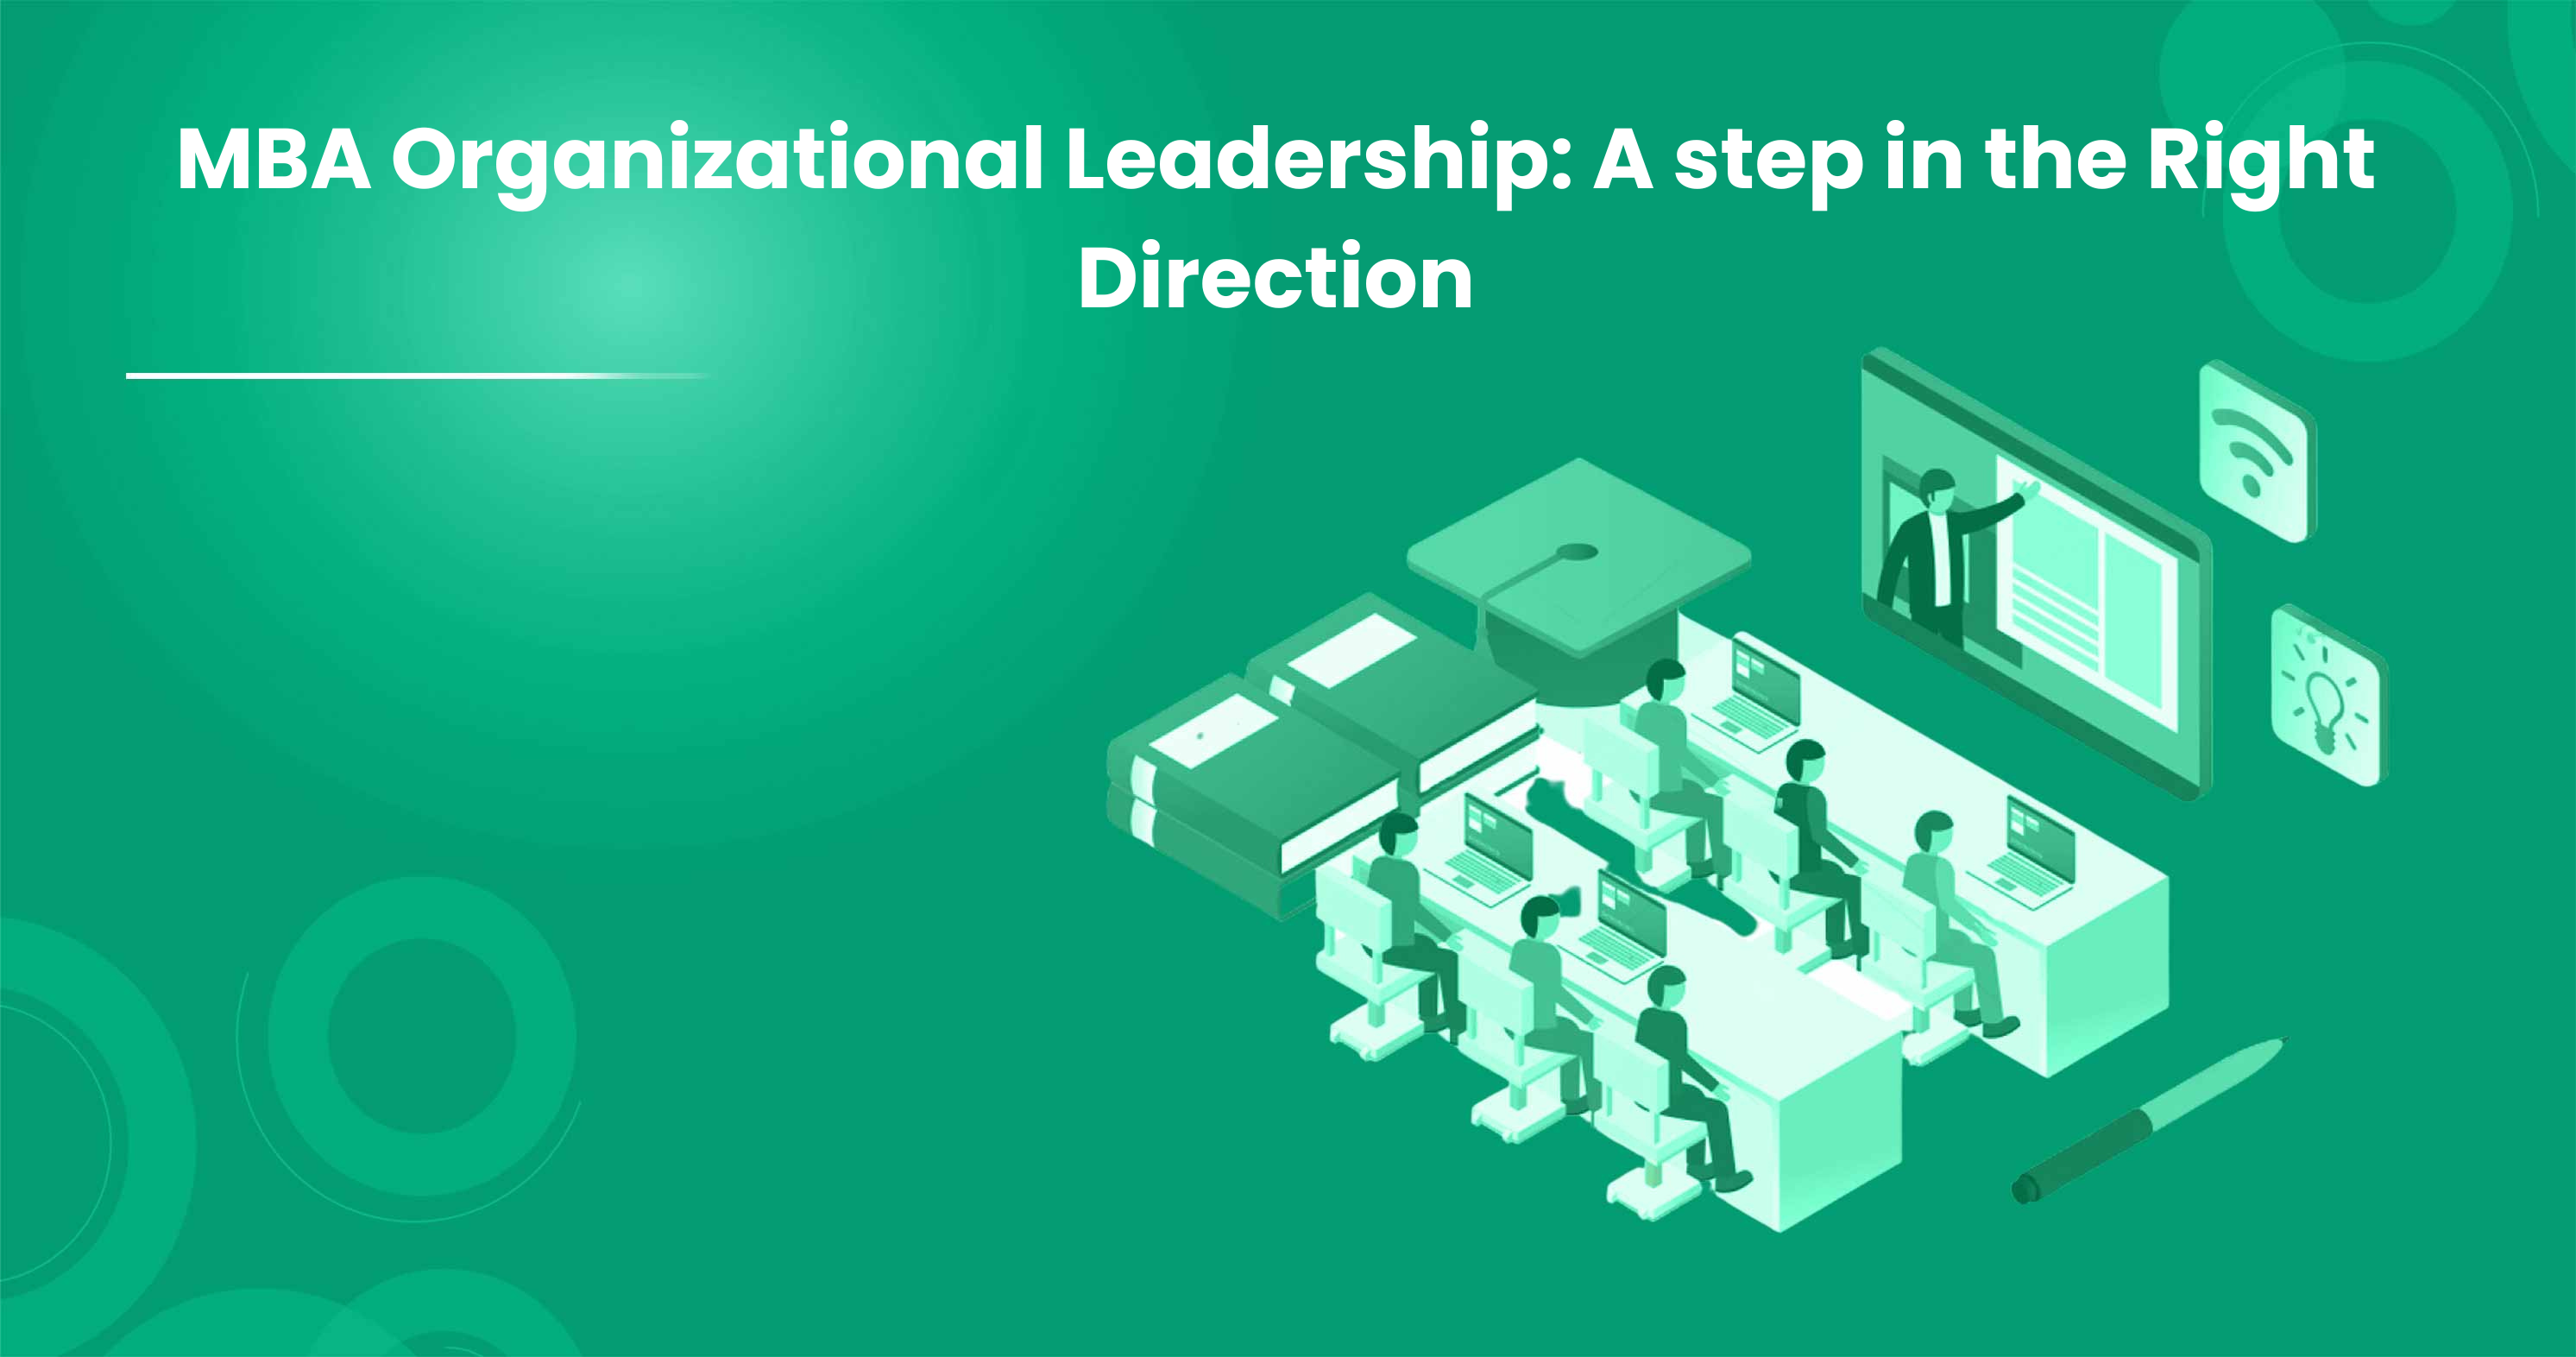 MBA Organizational Leadership: A step in the Right Direction